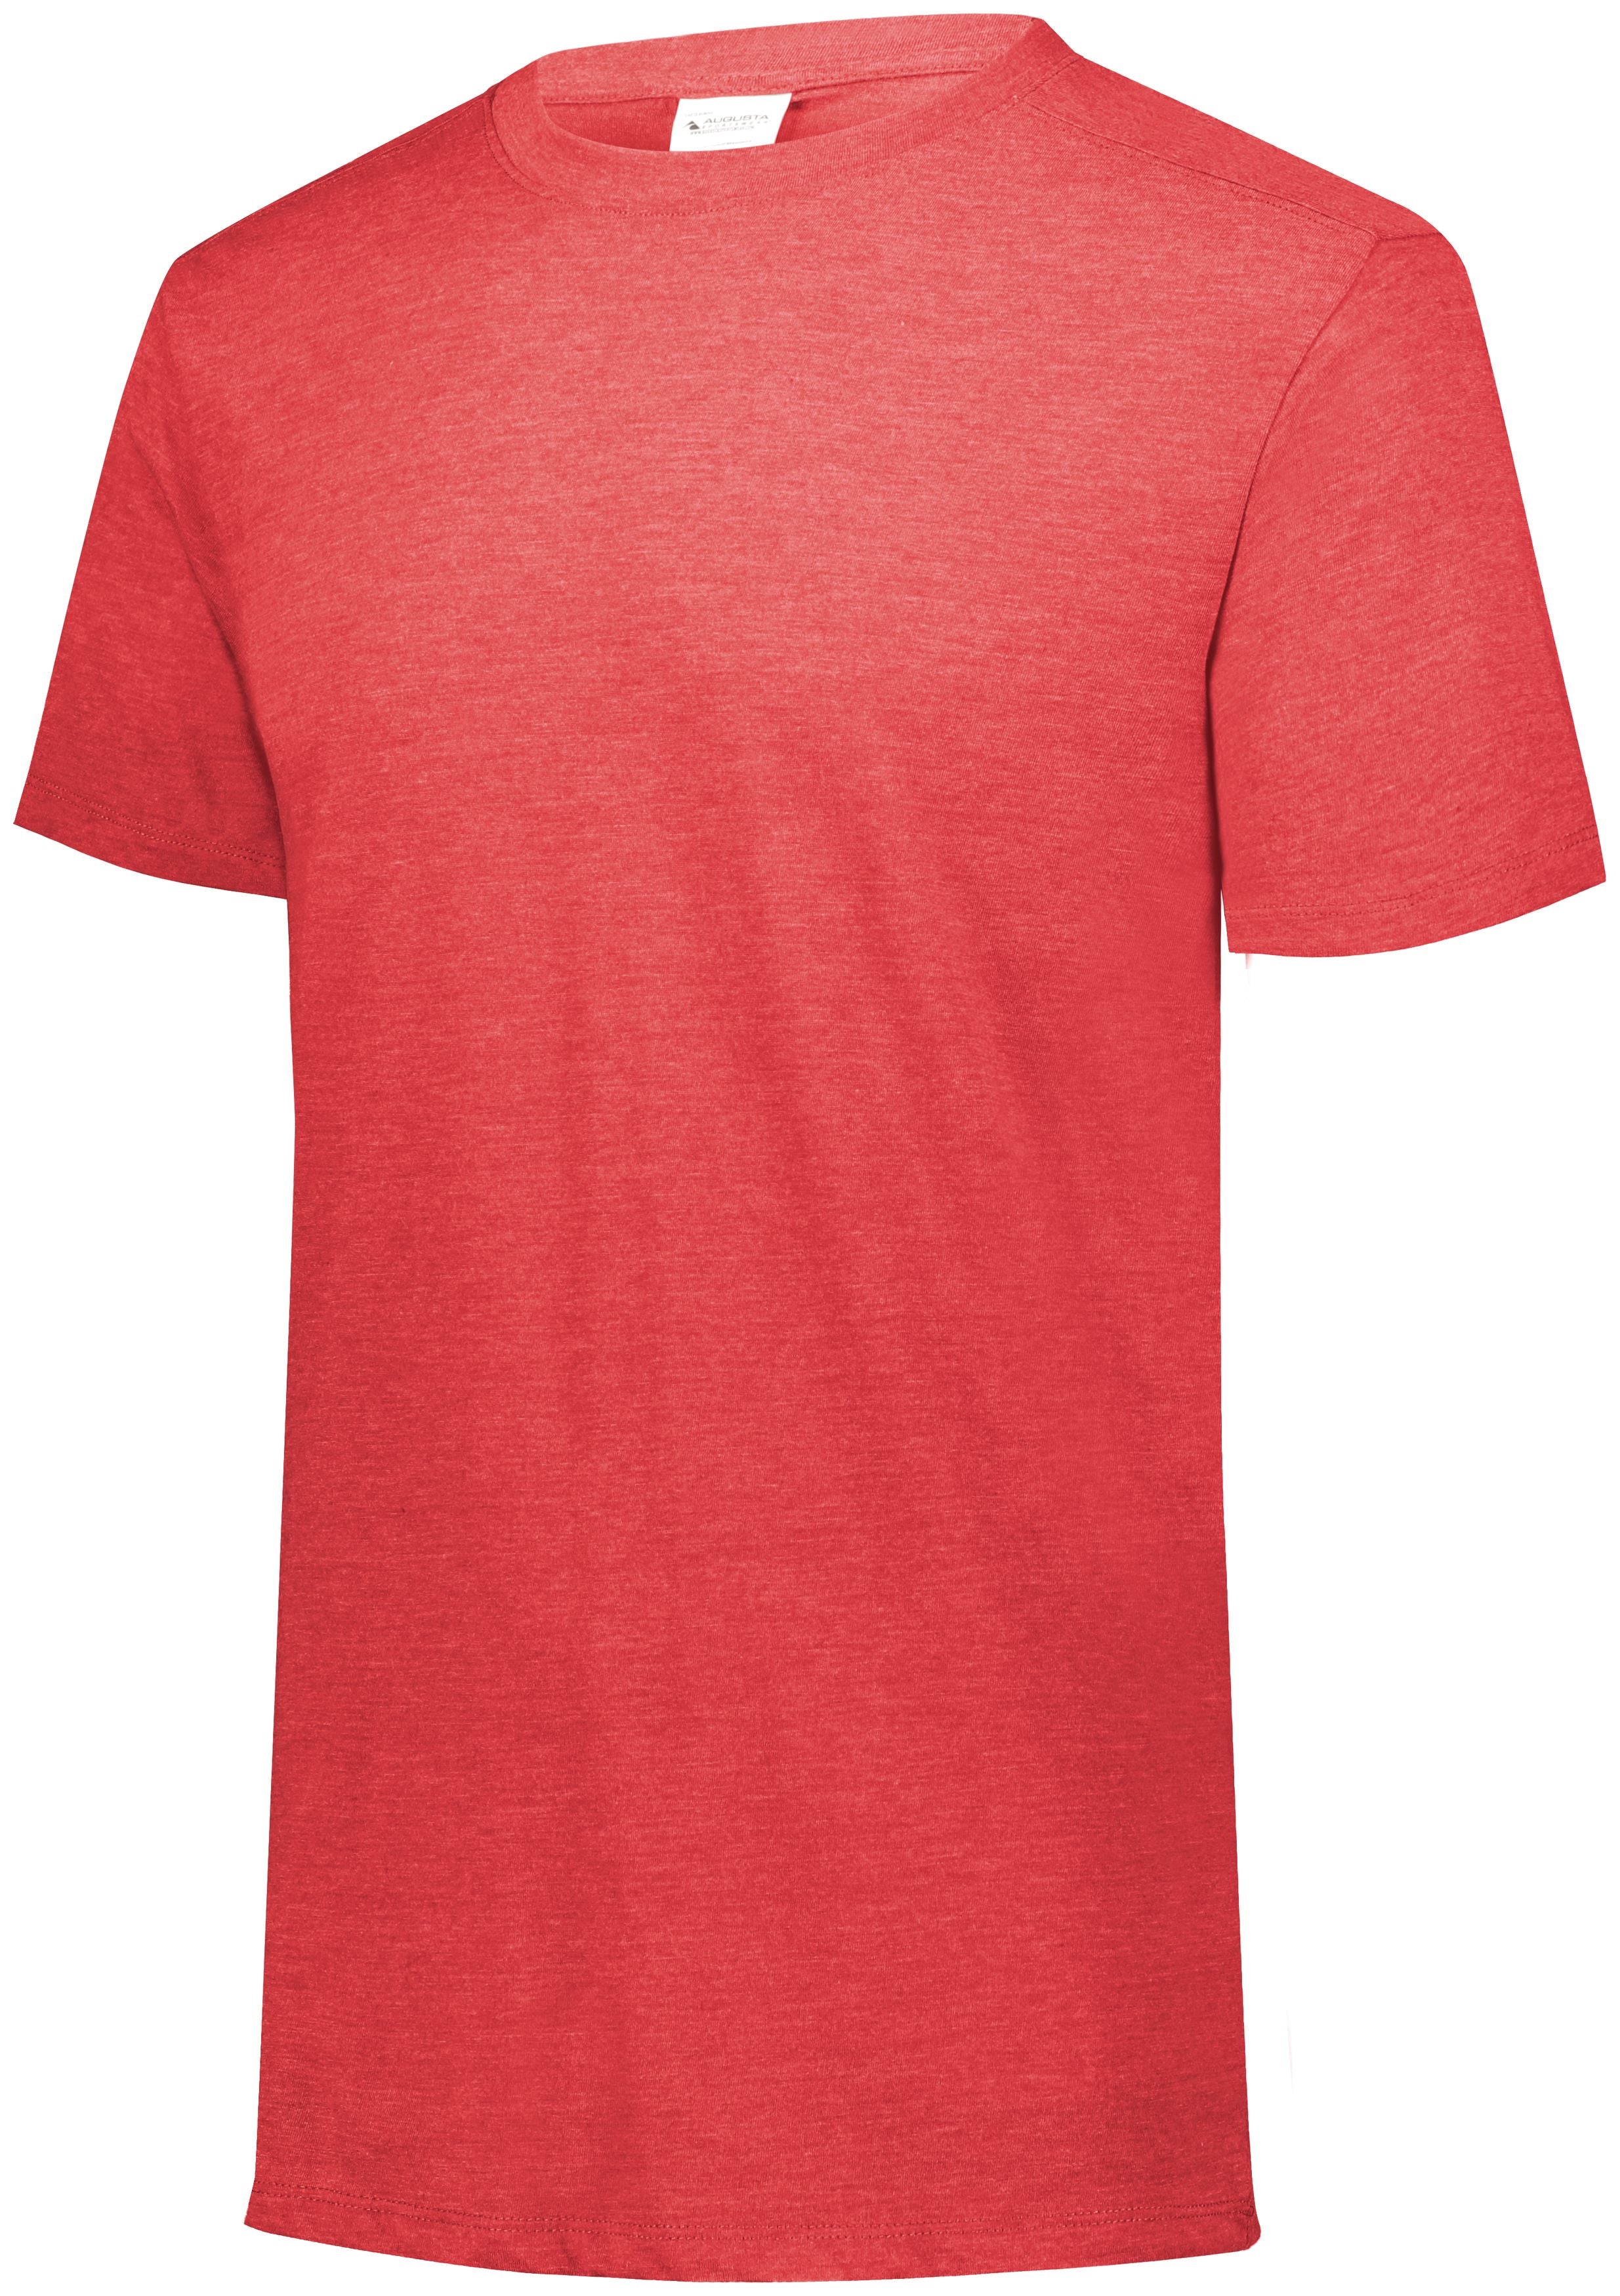 Augusta Sportswear Youth Tri-Blend T-Shirt in Red Heather  -Part of the Youth, Youth-Tee-Shirt, T-Shirts, Augusta-Products, Shirts product lines at KanaleyCreations.com